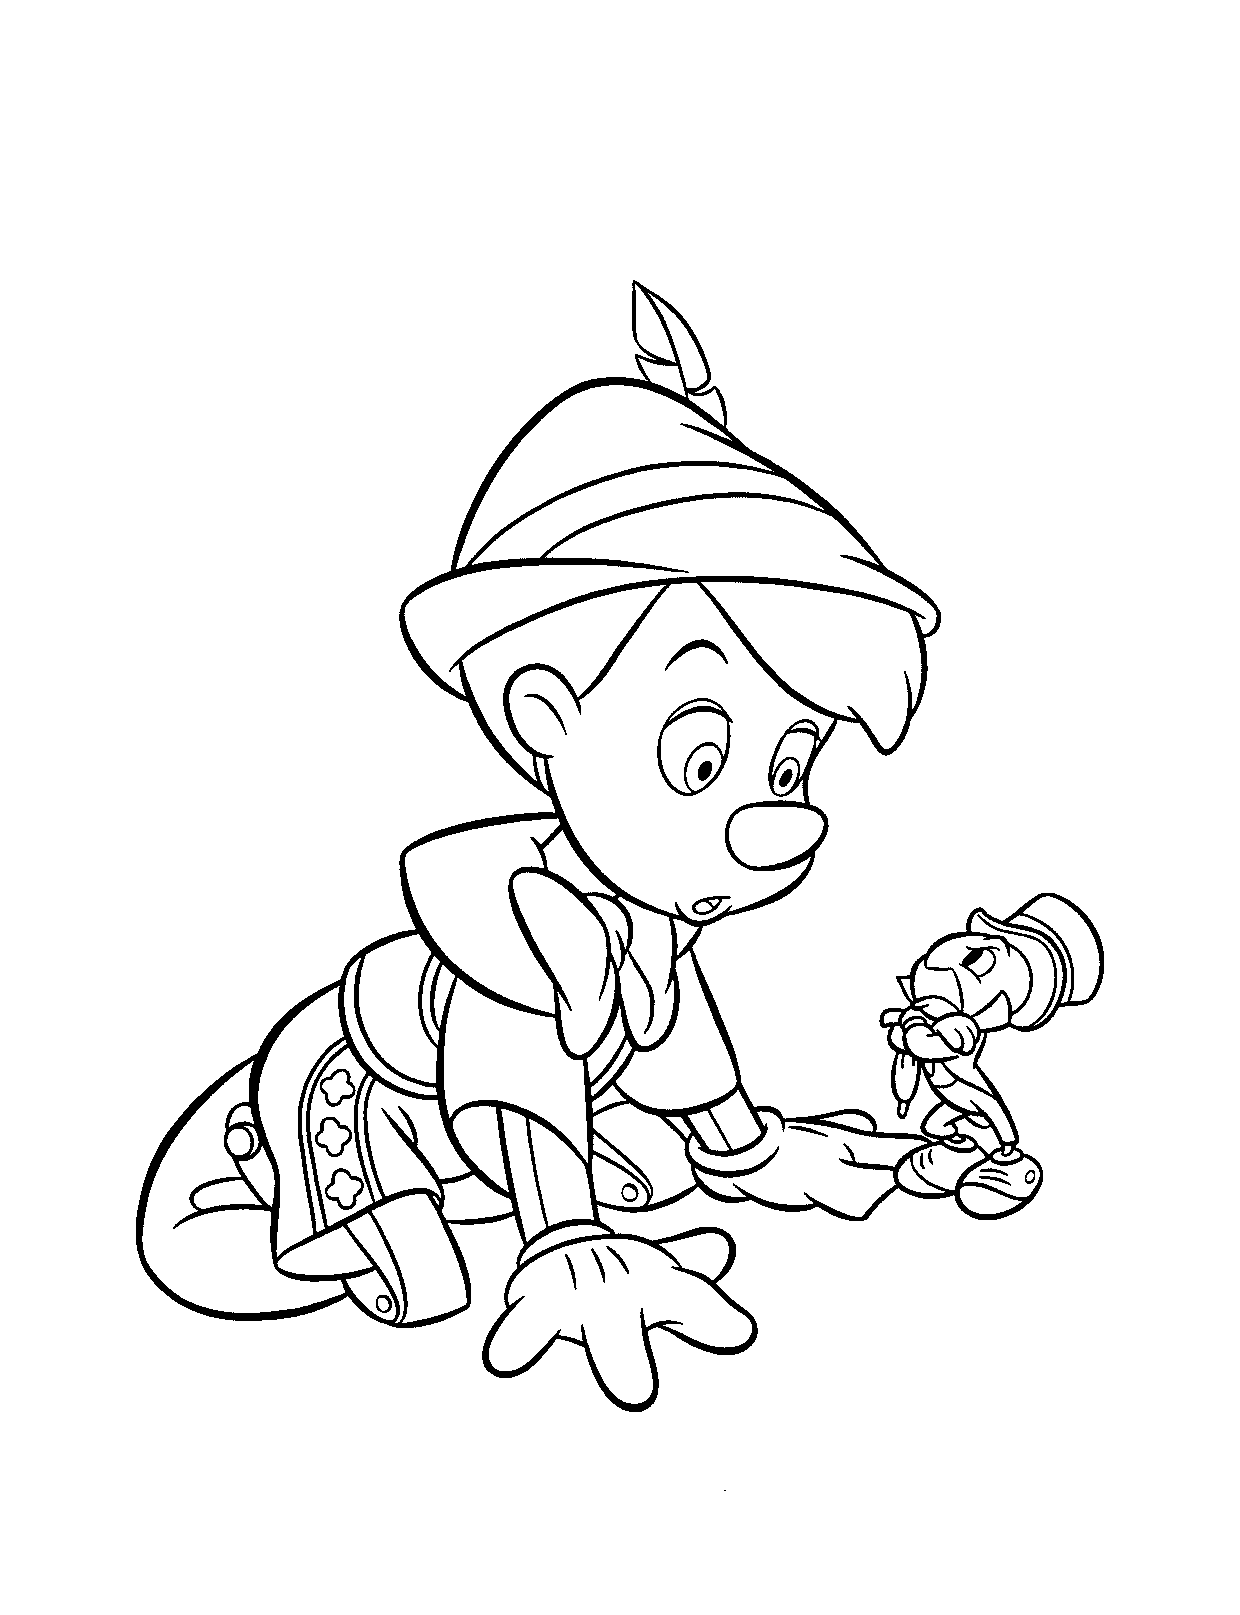 Pinocchio Coloring Pages TV Film Pinocchio to Print Printable 2020 06392 Coloring4free